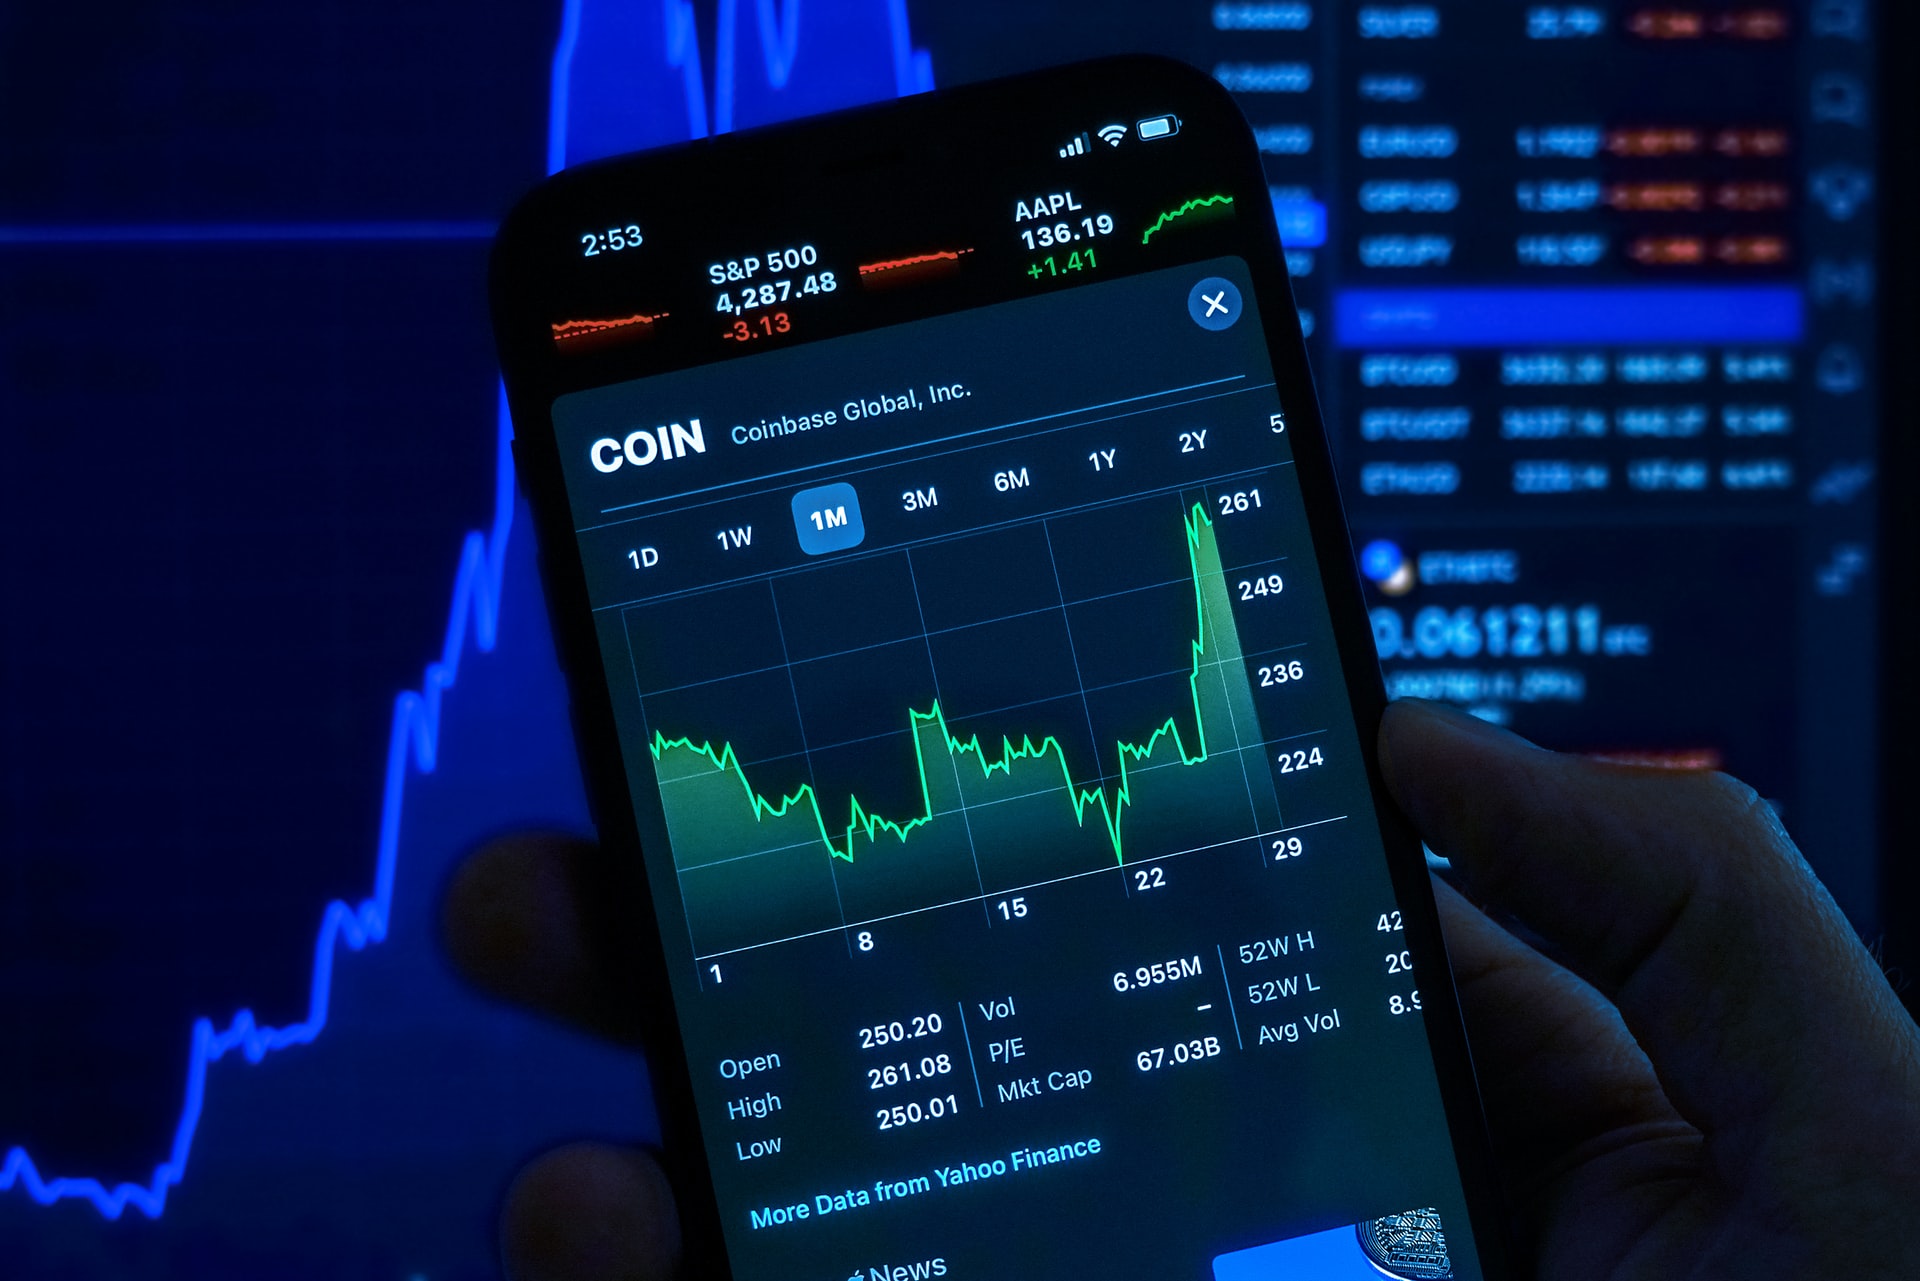 Cryptocurrency charts opened on phone and laptop picture in hd